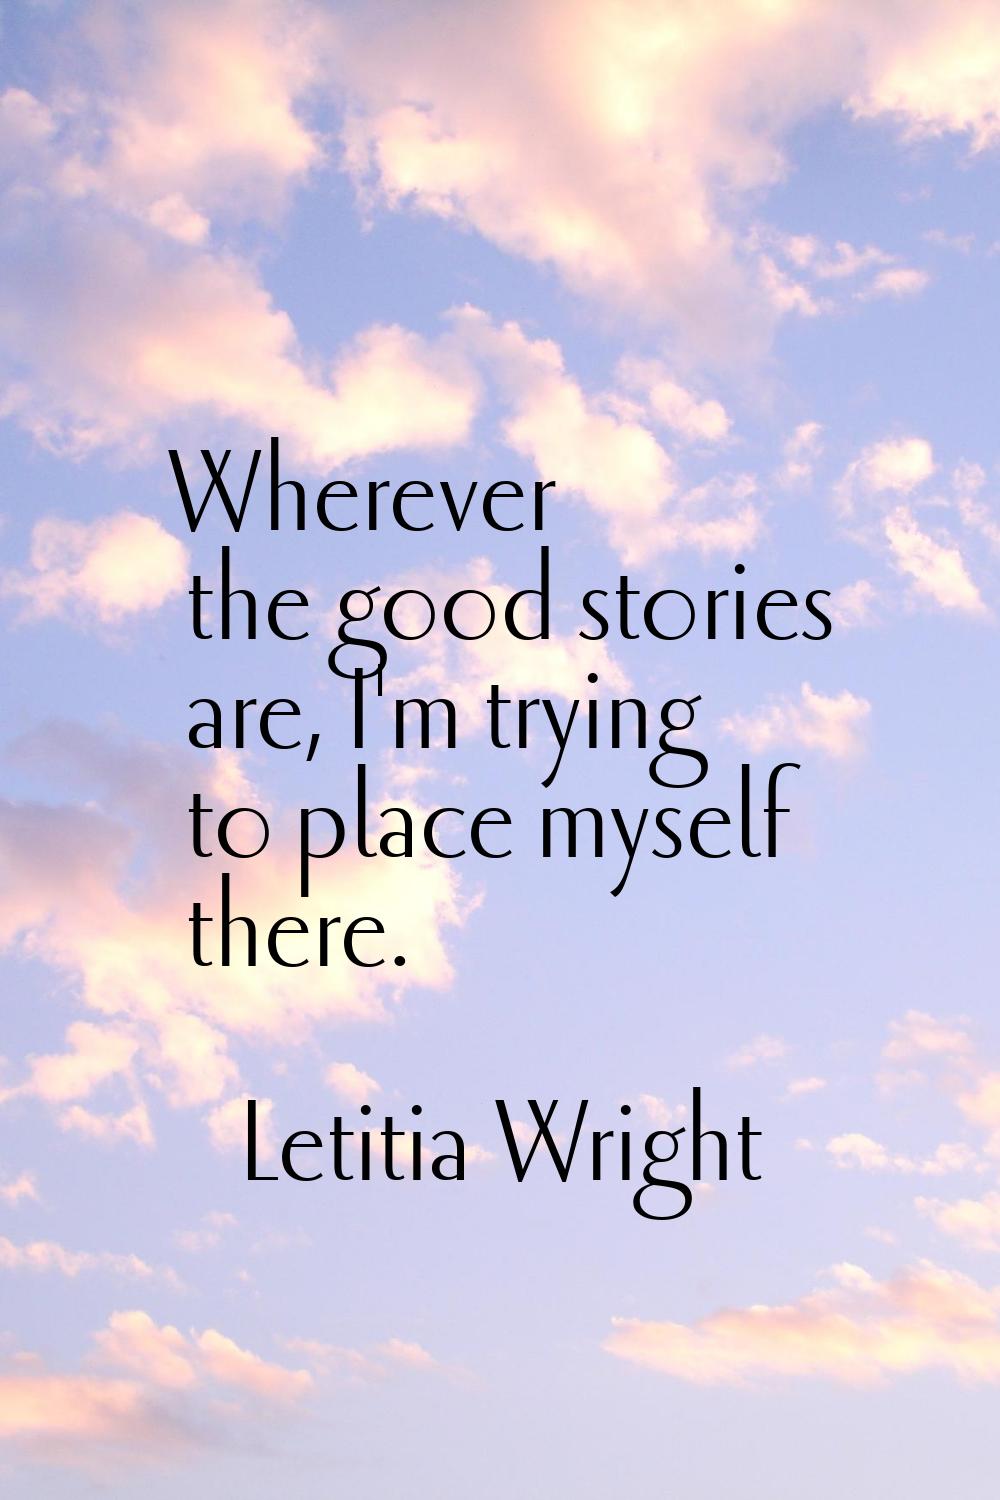 Wherever the good stories are, I'm trying to place myself there.